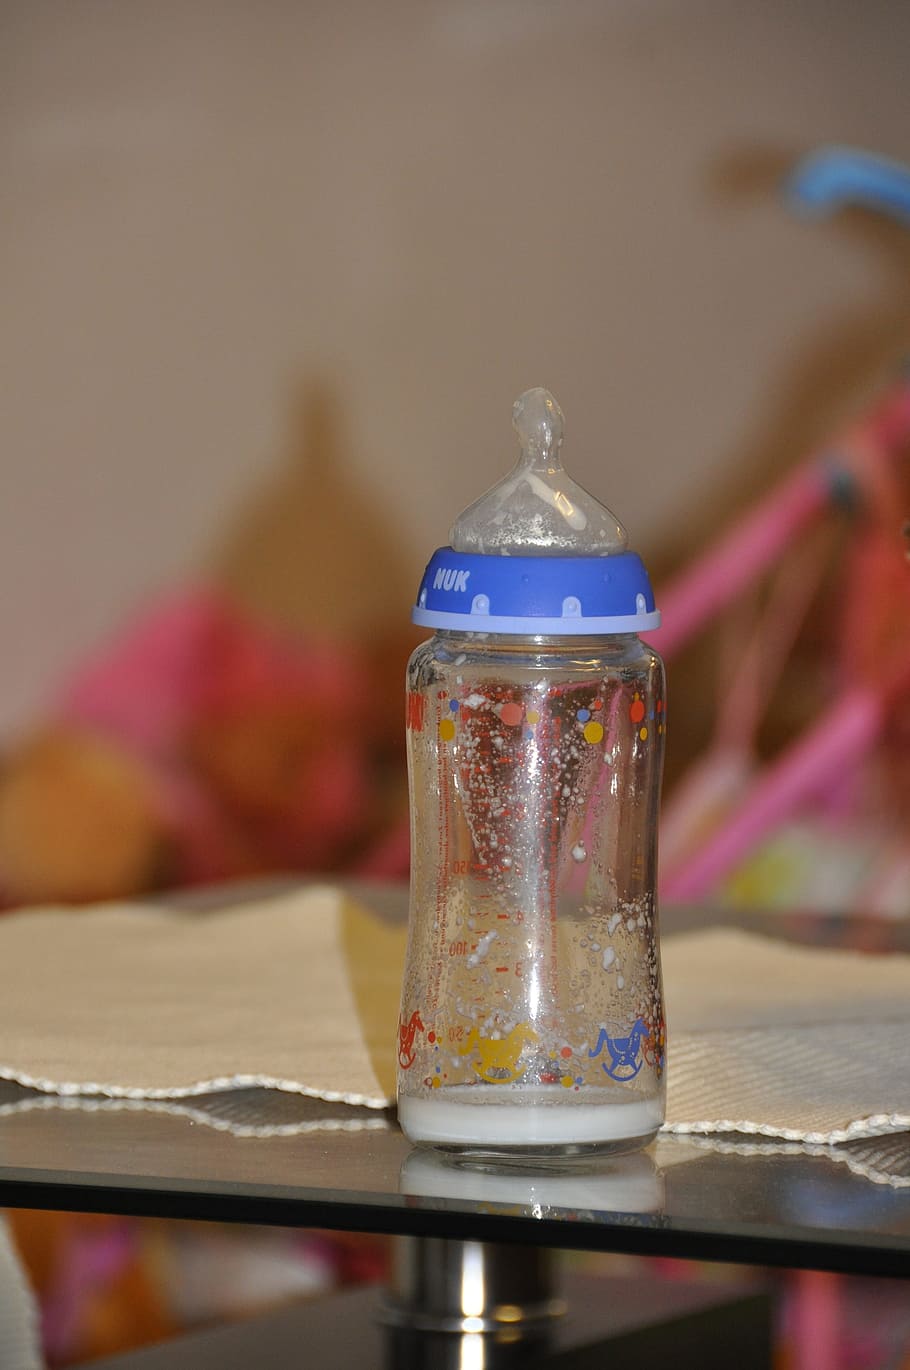 empty vials, baby, bottle, table, focus on foreground, indoors, close-up, container, glass - material, transparent